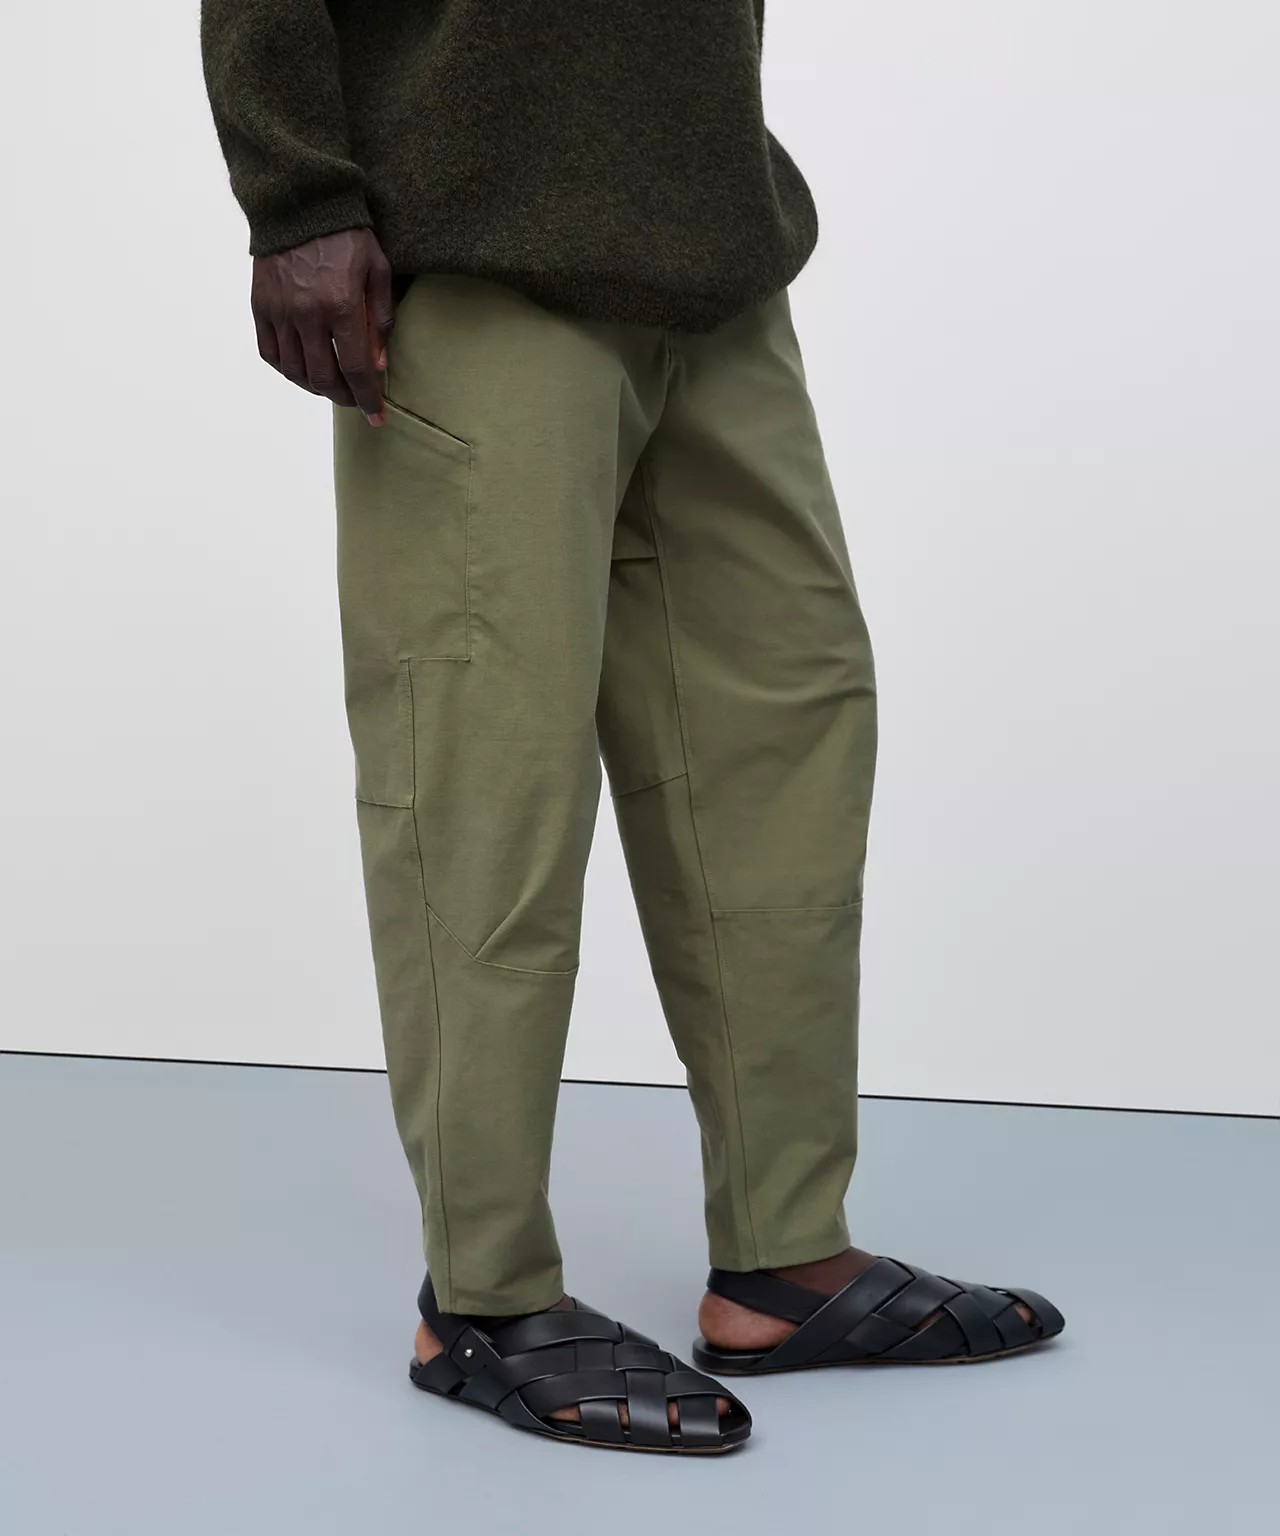 The 9 Best Men's Cargo Pants, From Dickies to Lululemon